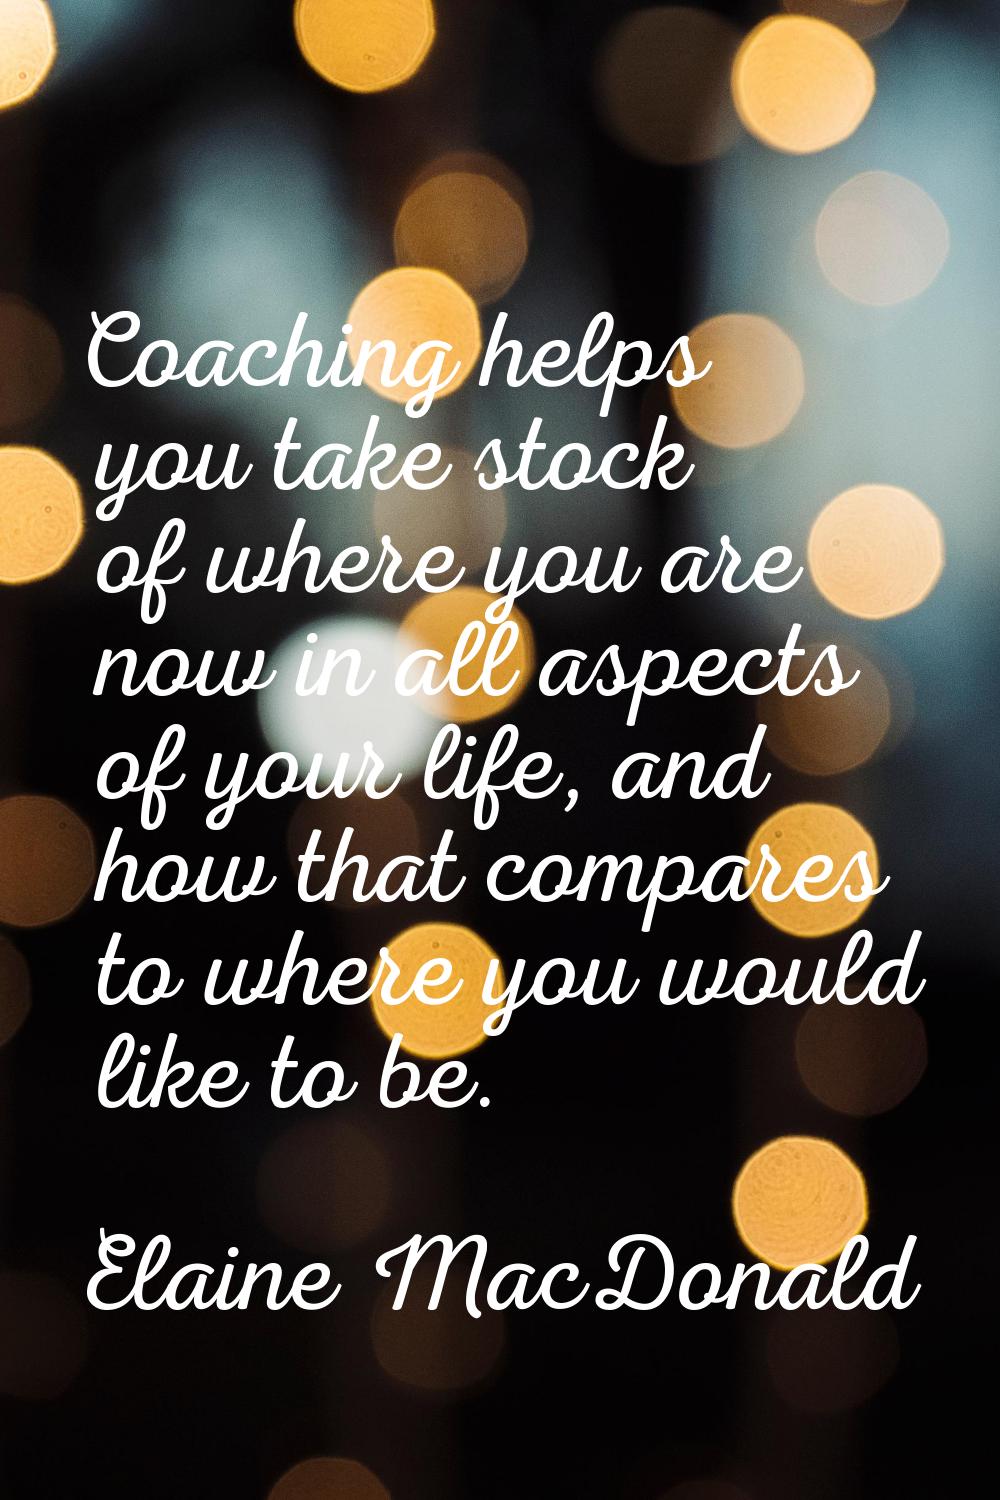 Coaching helps you take stock of where you are now in all aspects of your life, and how that compar